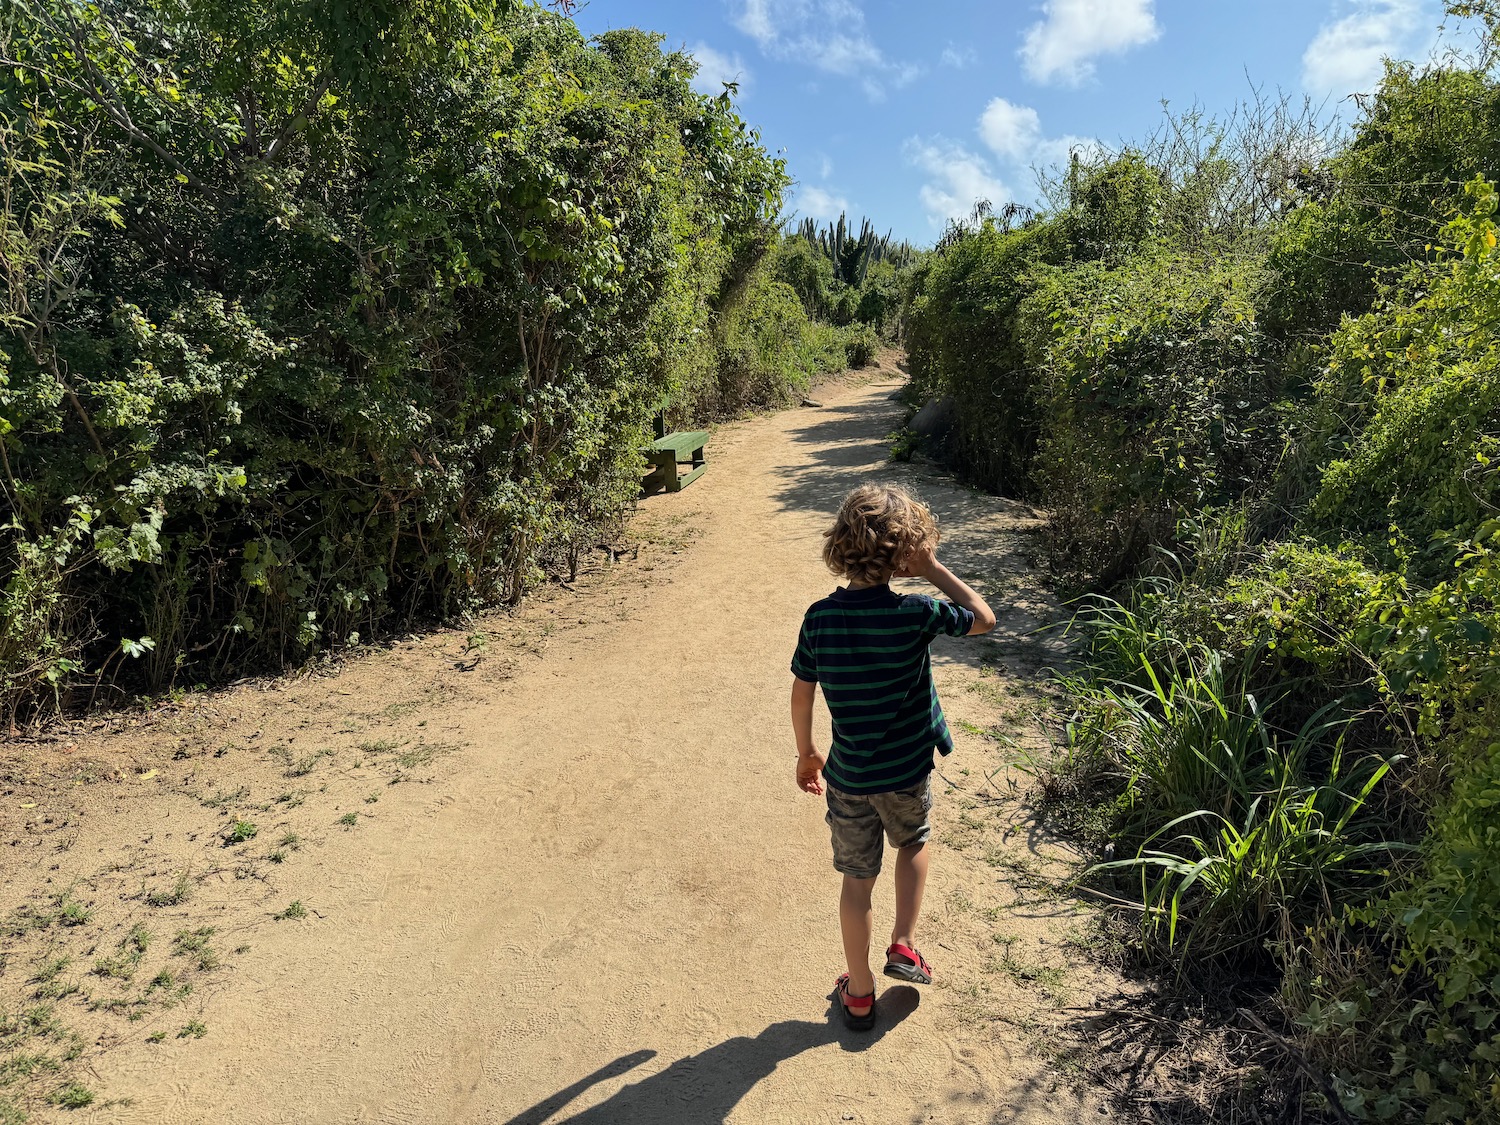 a boy walking on a dirt path with trees and blue sky